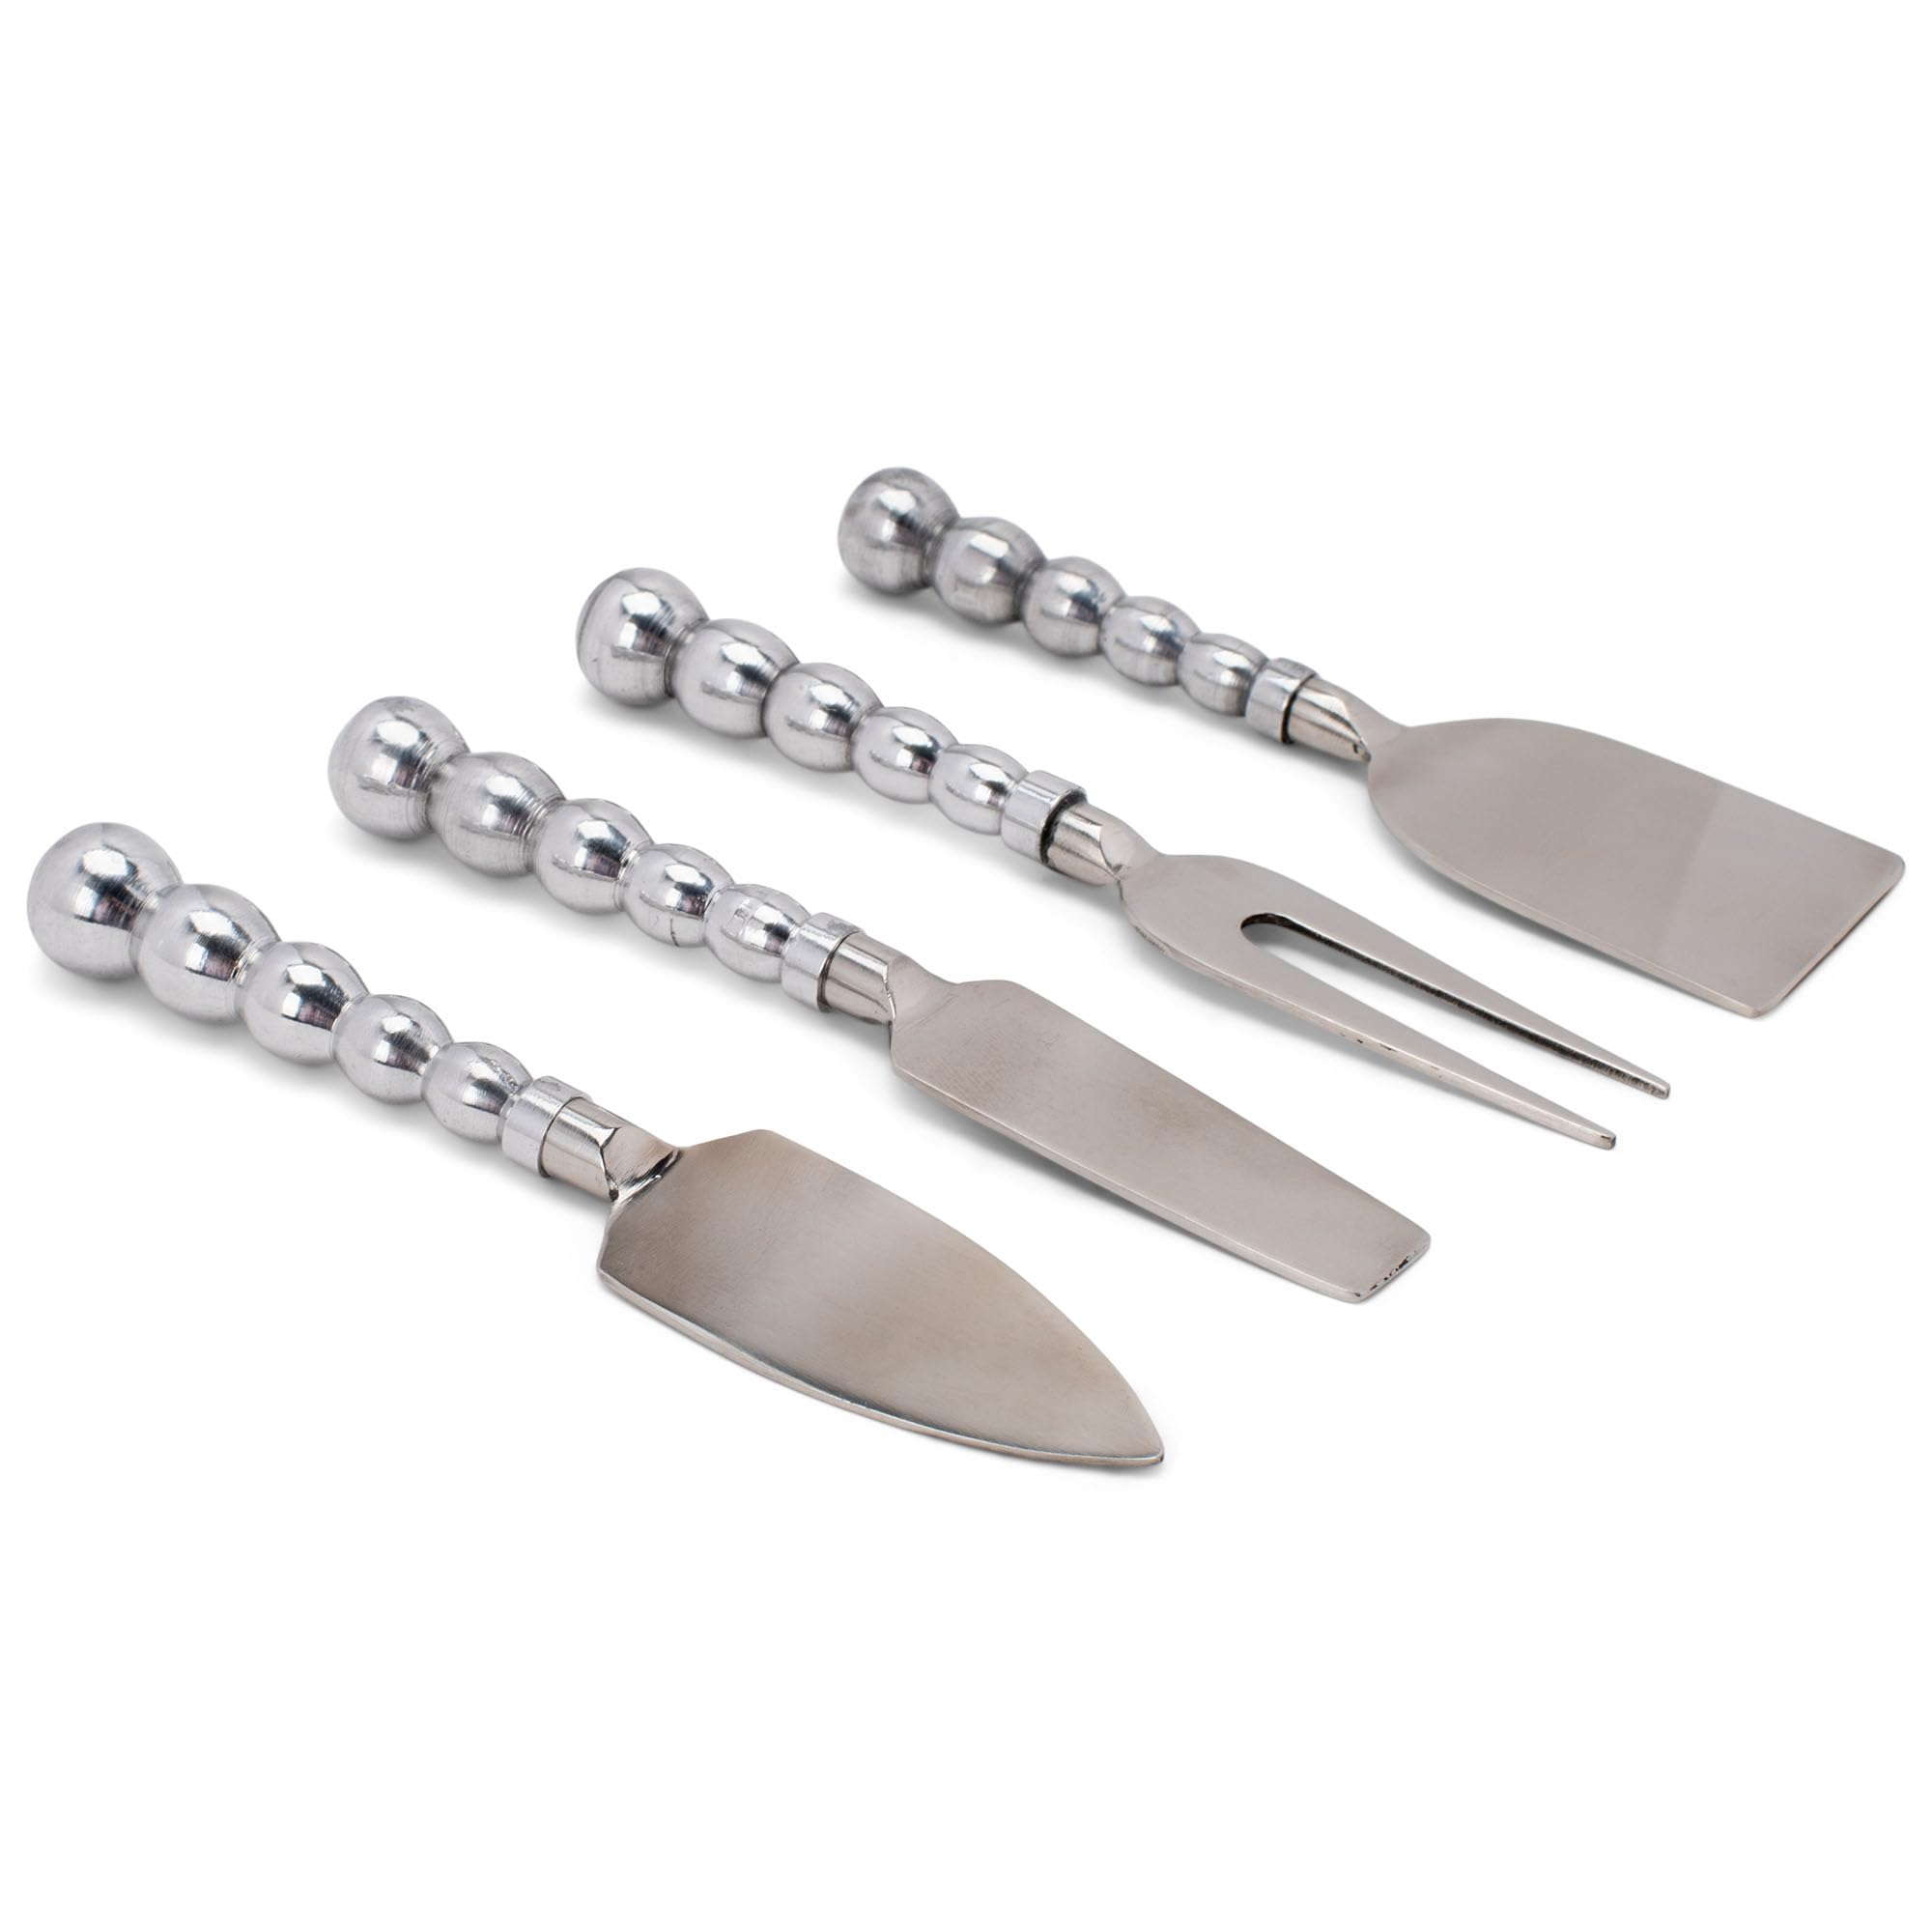 IHI EST. 1986 India Handicrafts Beaded Silver Tone 6 inch Metal Cheese Knives Set of 4